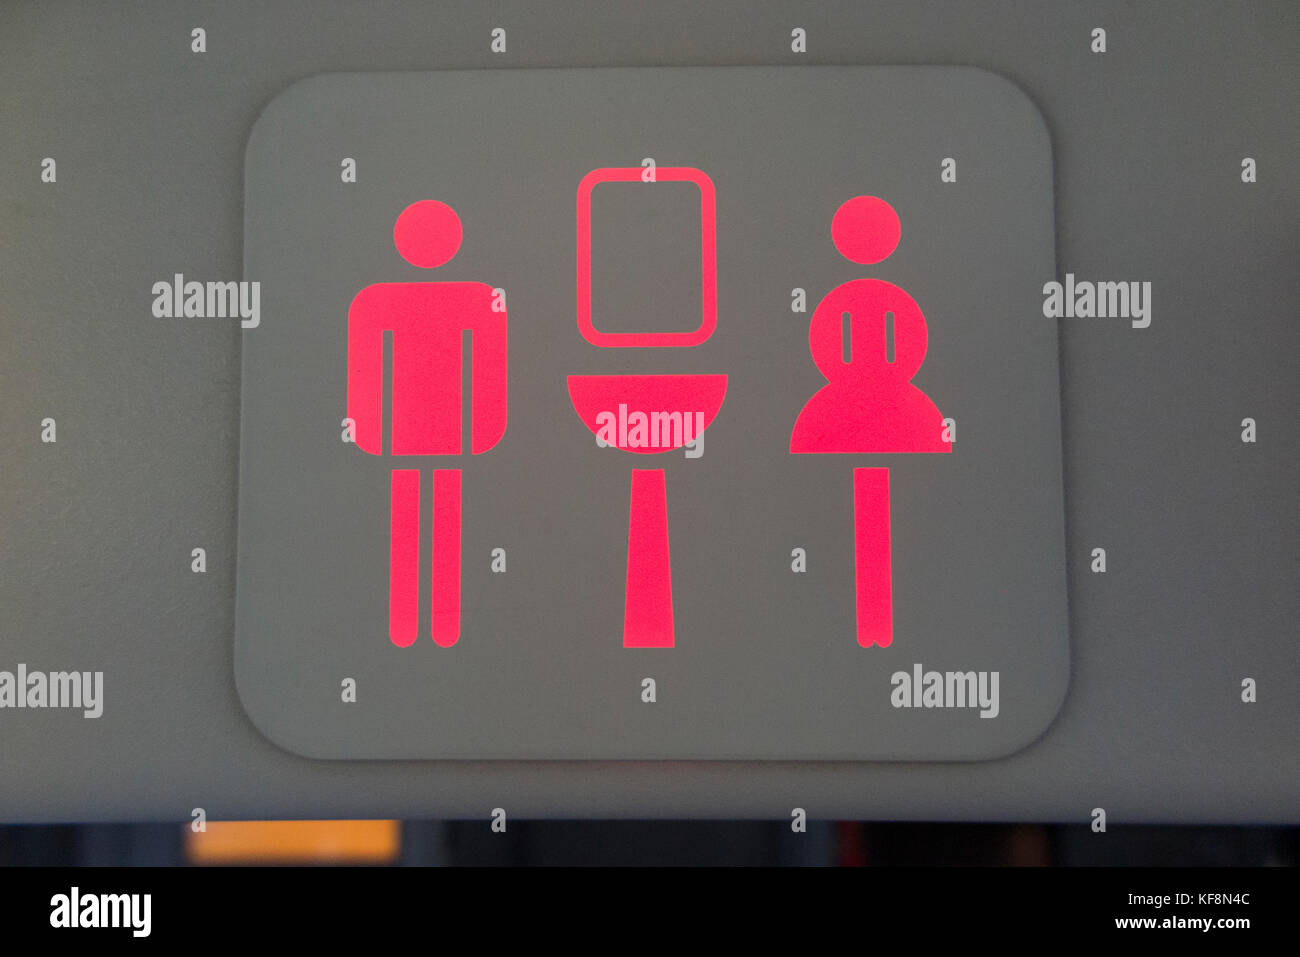 Toilet toilets sign / lavatory / loo / WC / ladies / gents / logo signs on an Airbus A320-214 airplane / Air plane / aeroplane / aircraft. (91) Stock Photo